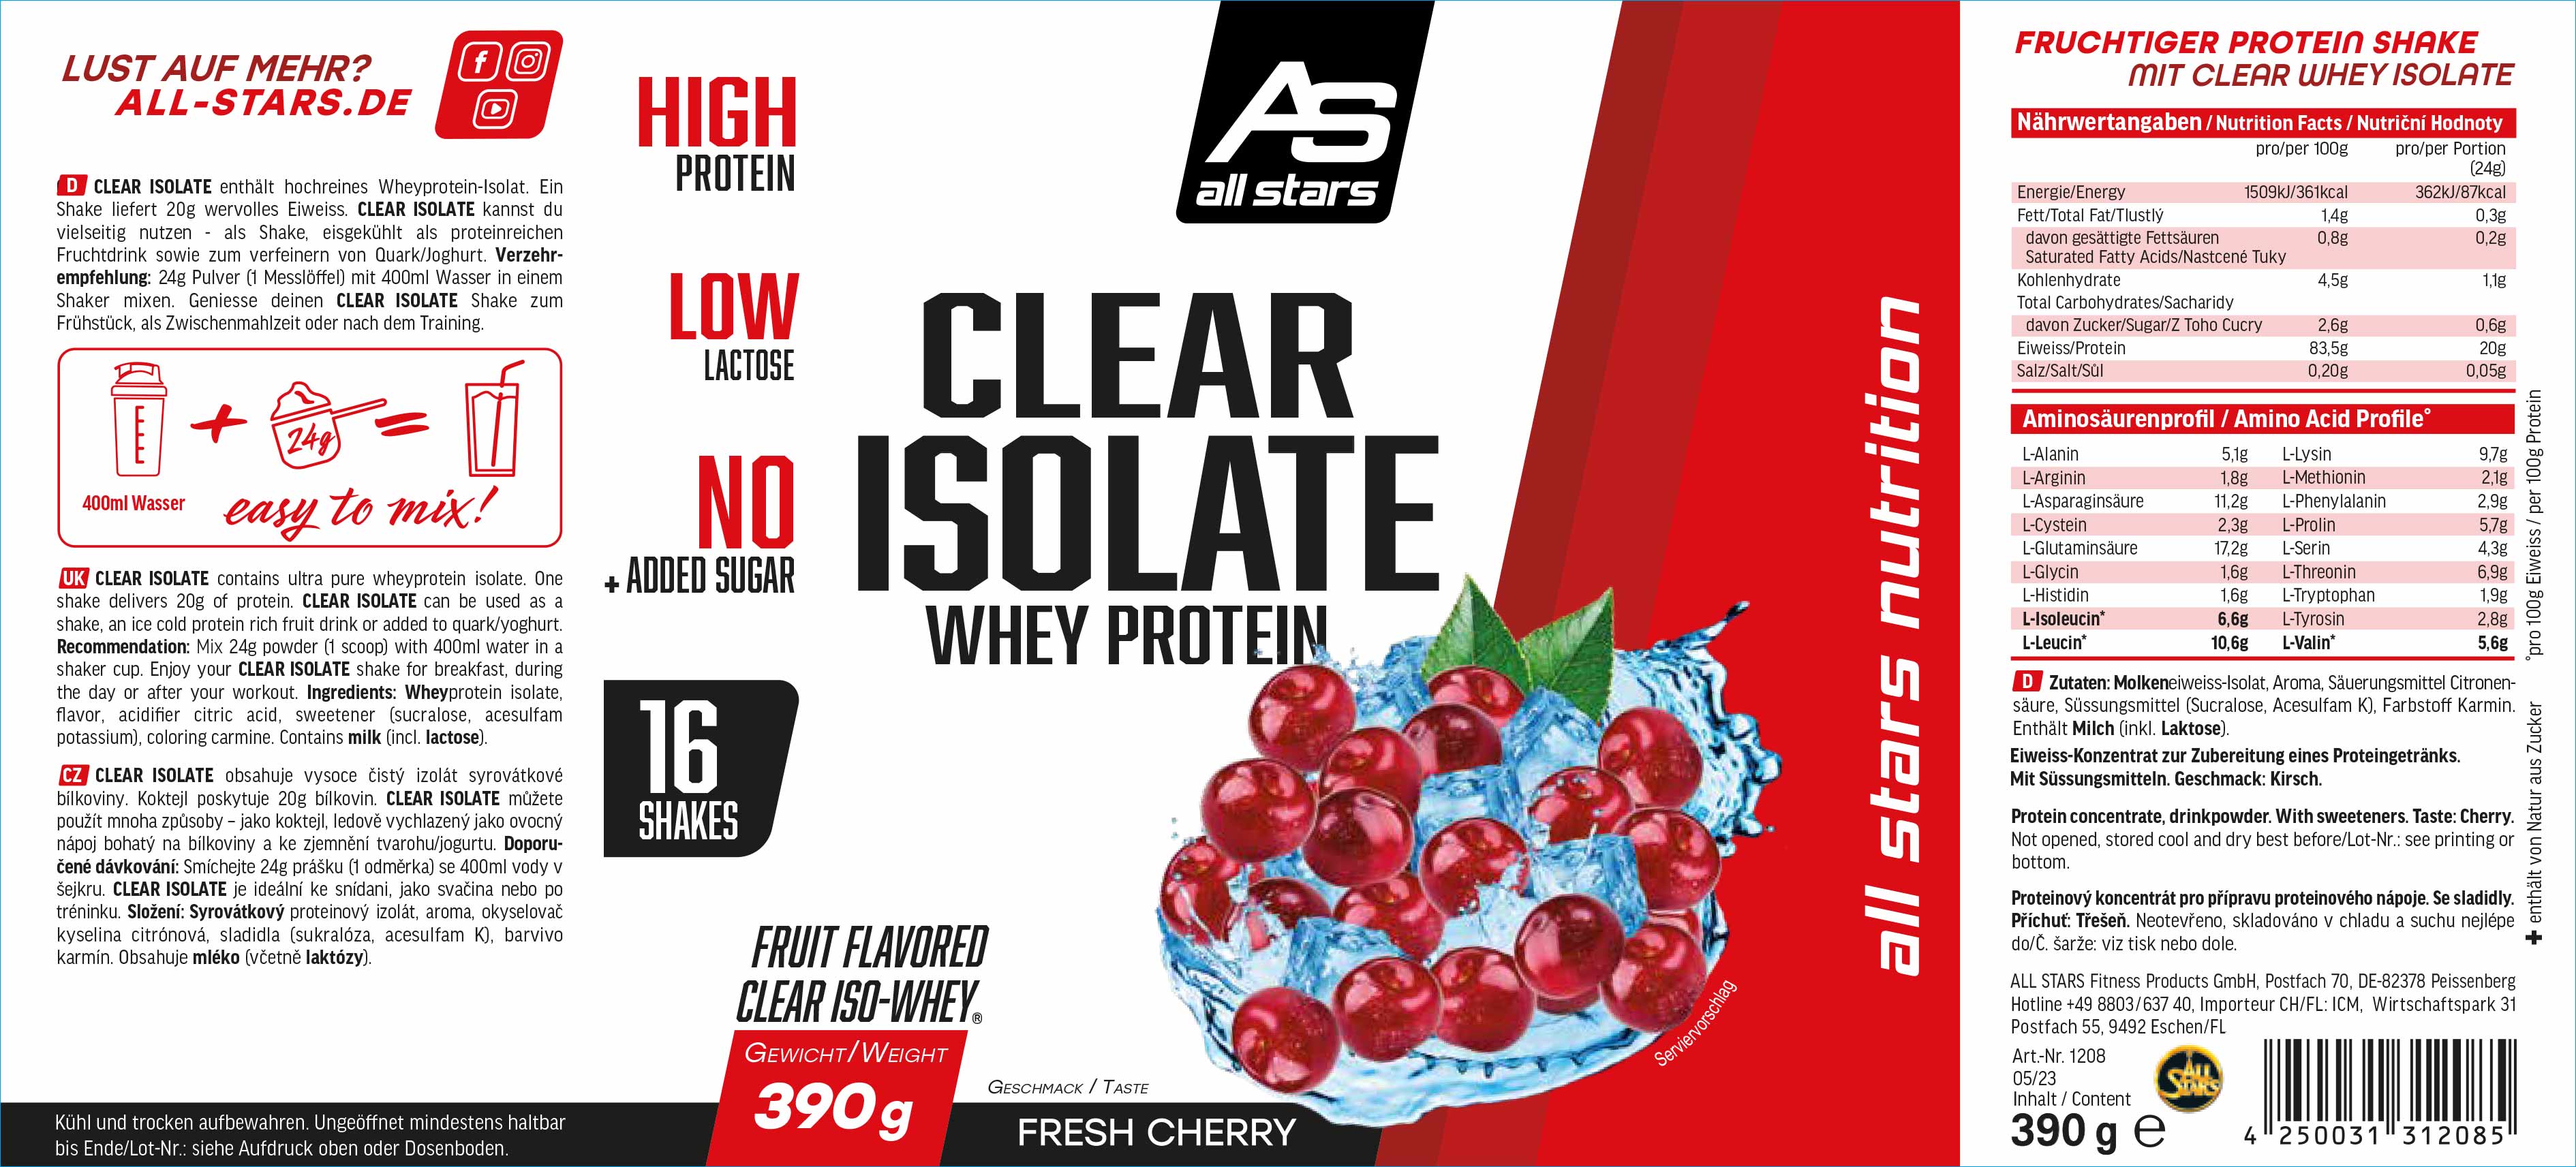 ALL STARS CLEAR ISOLAT WHEY PROTEIN - 390g